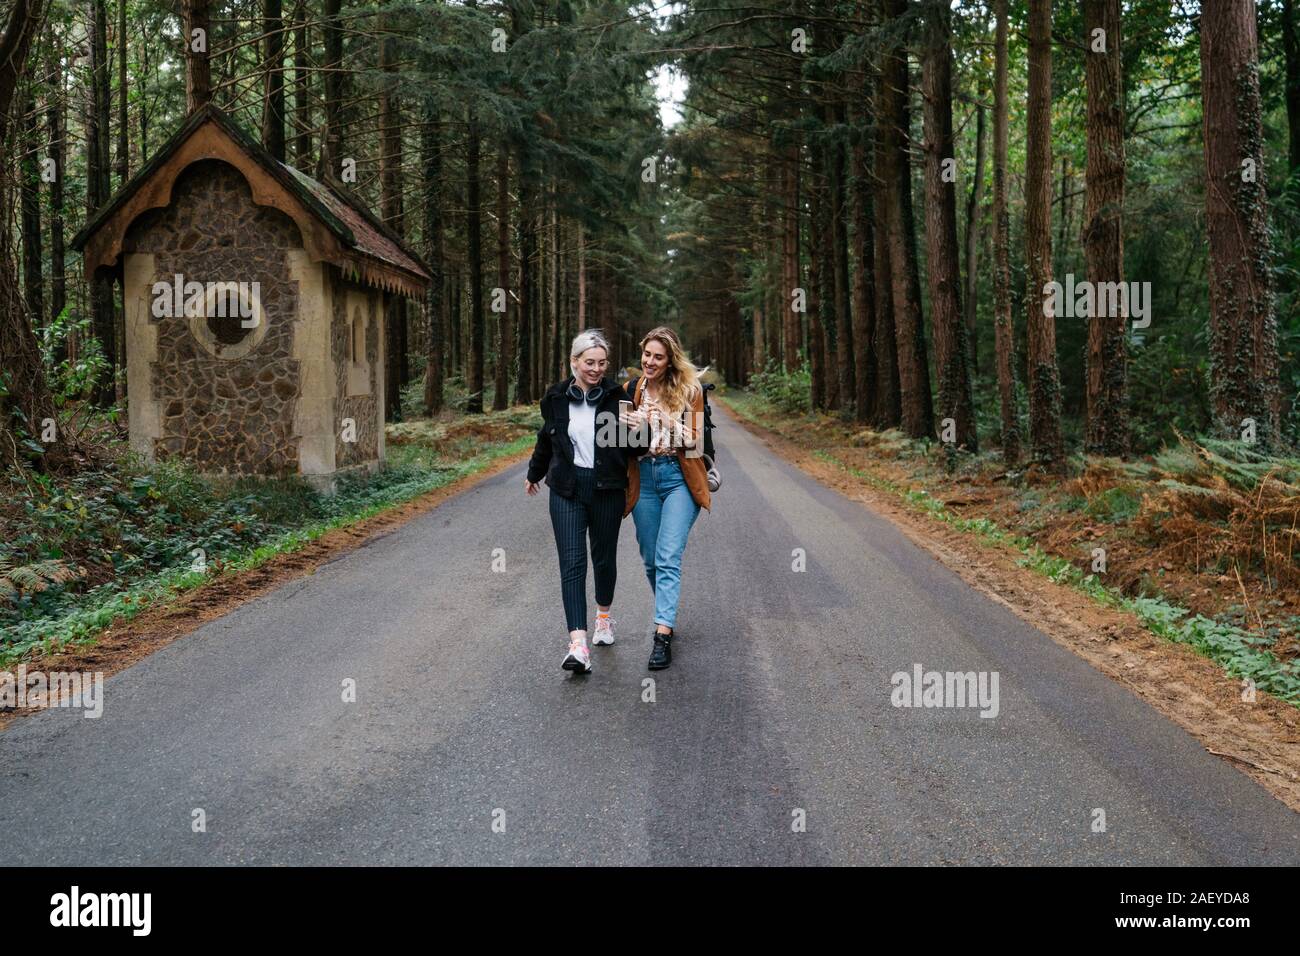 Two women walking on a road in the forest while watching their phone Stock Photo